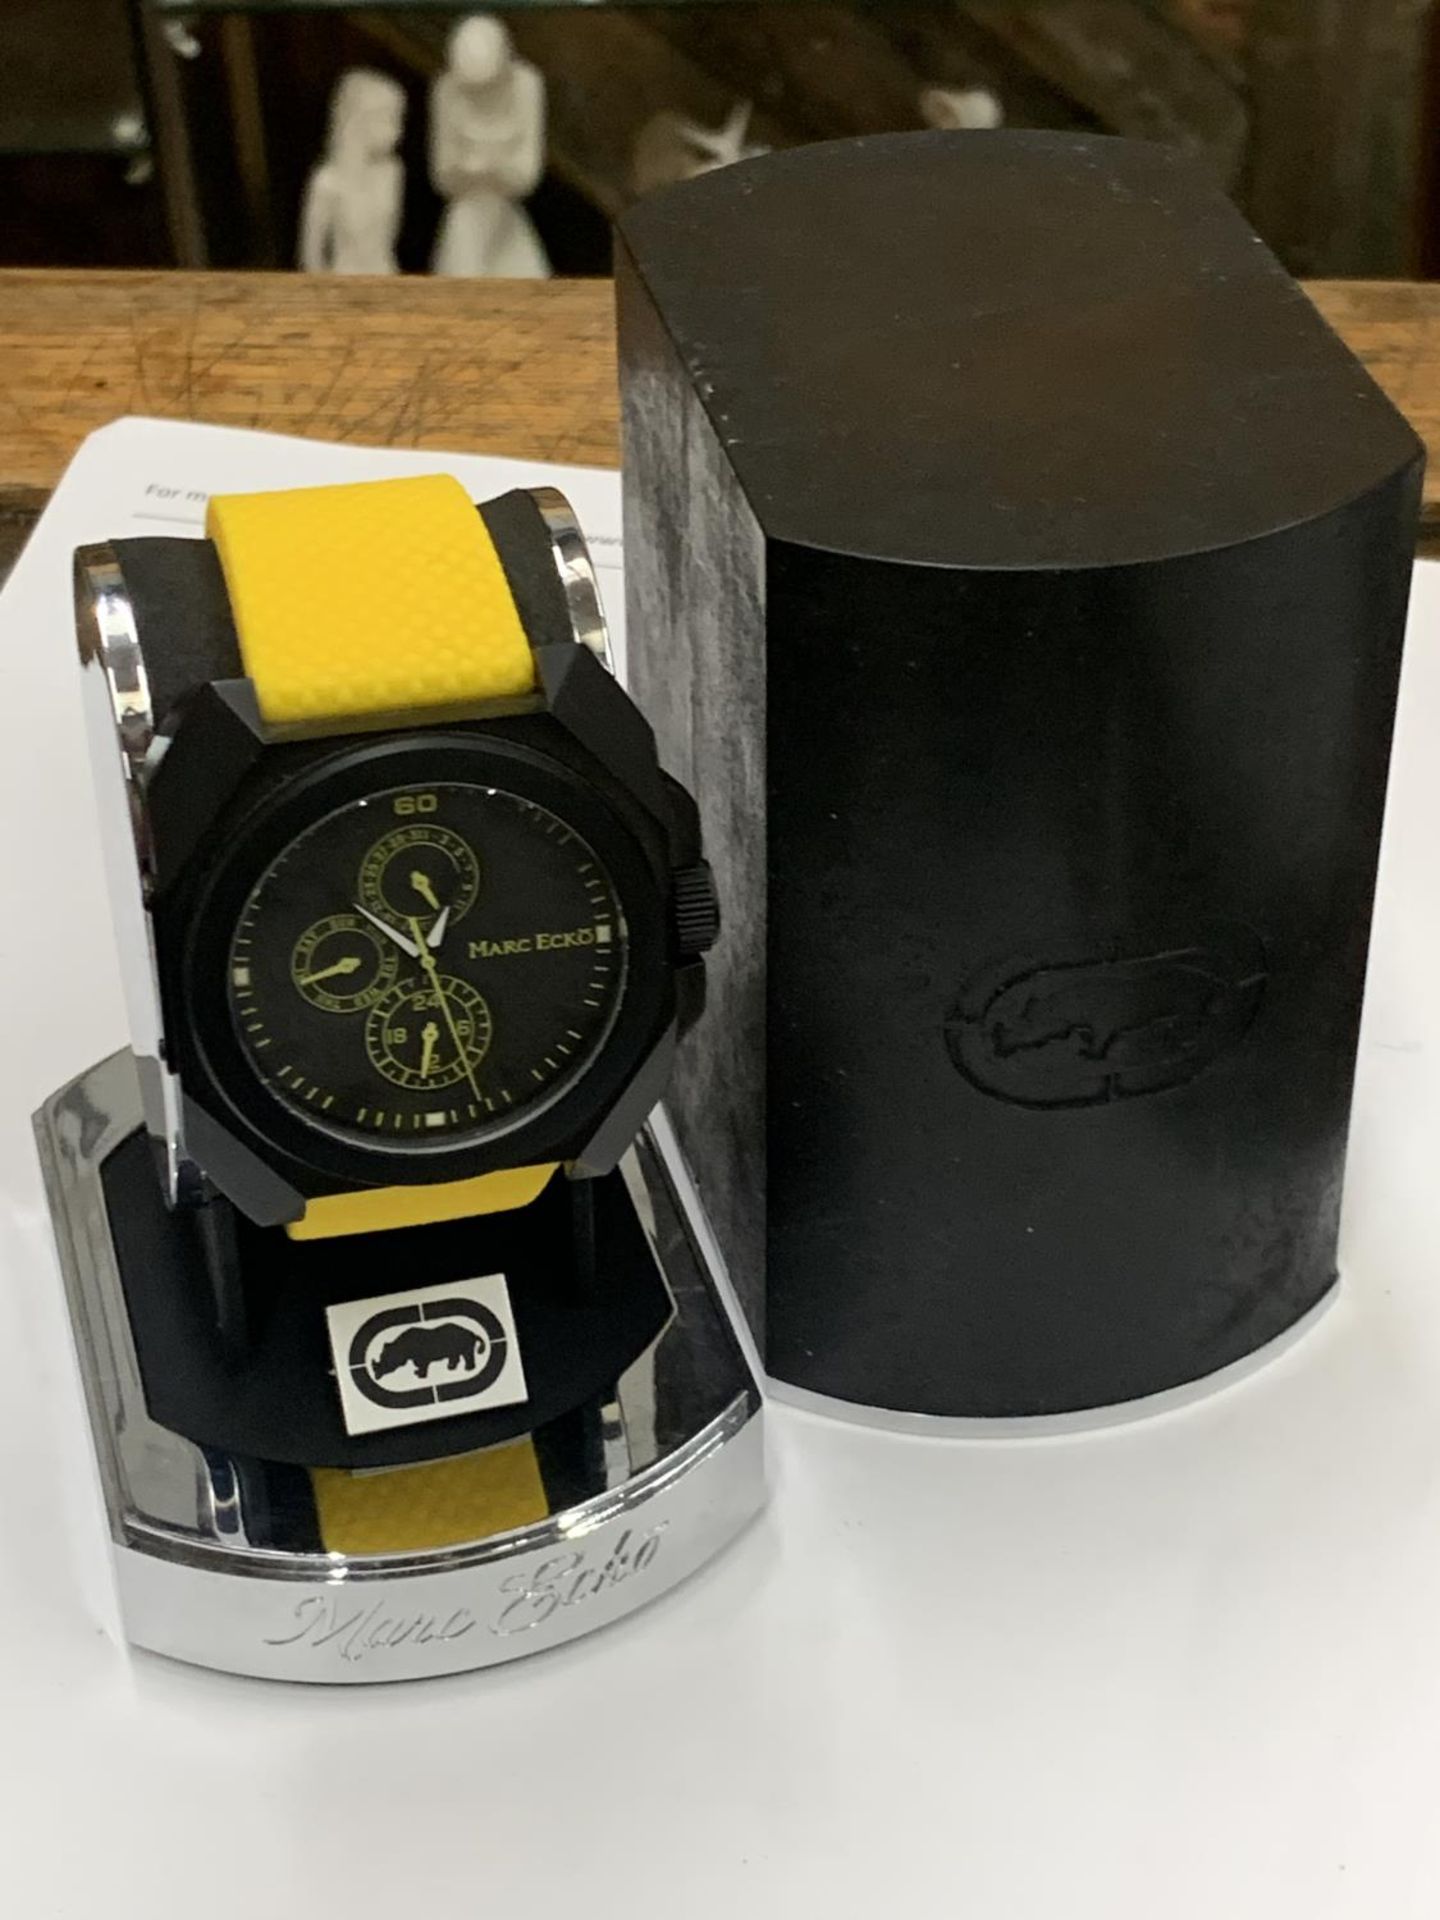 A MARC ECKO PASTIME WATCH (QUARTZ) MODEL E1359861 DAY DATE AS NEW WITH BOX SEEN IN WORKING ORDER BUT